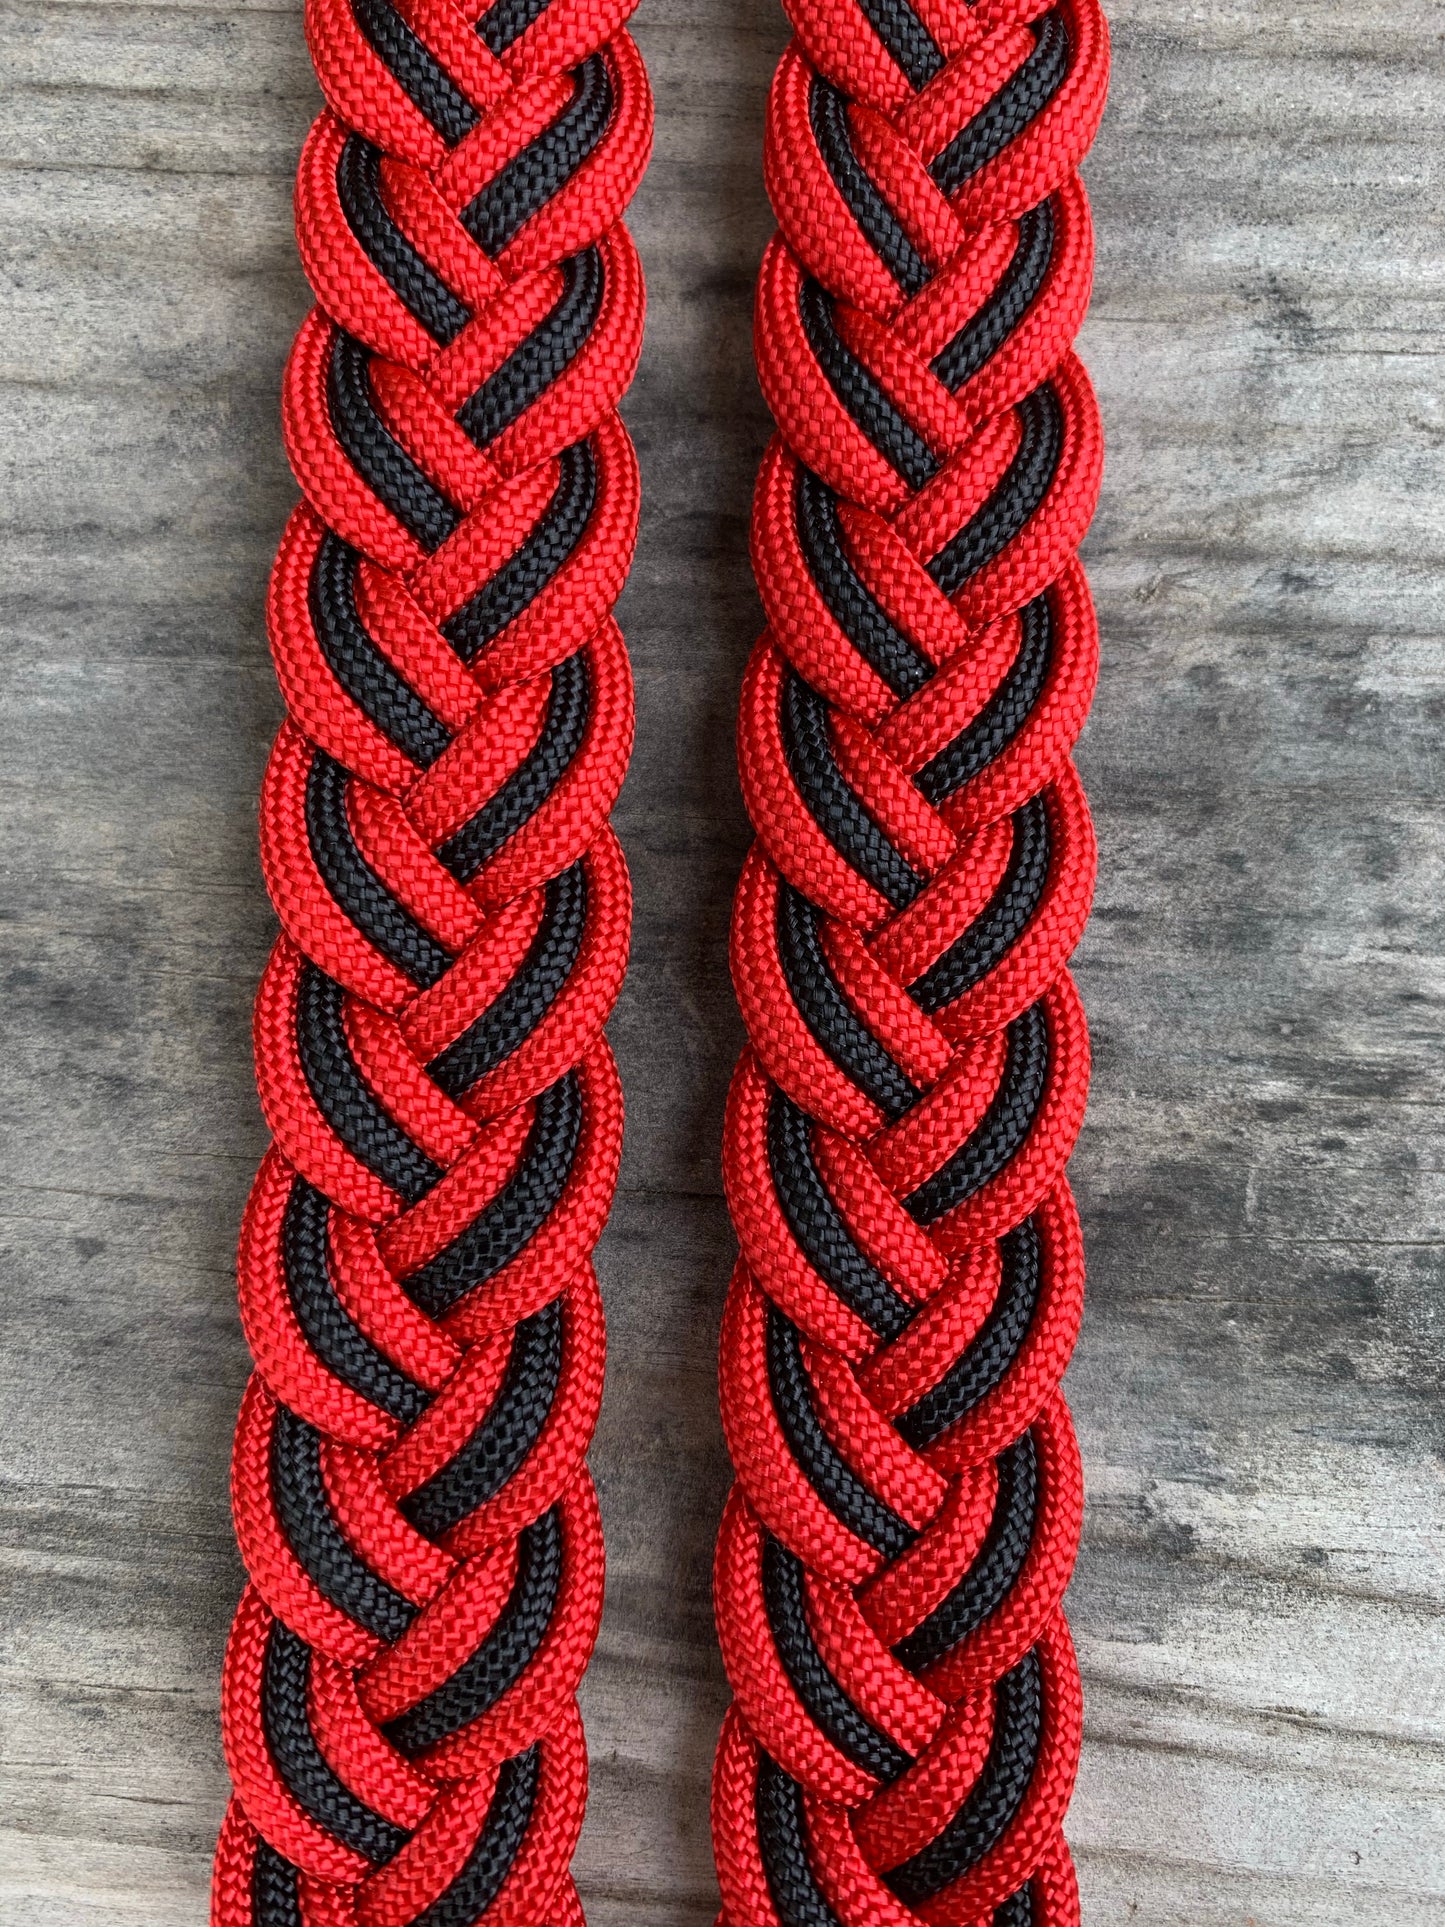 Red and black reins